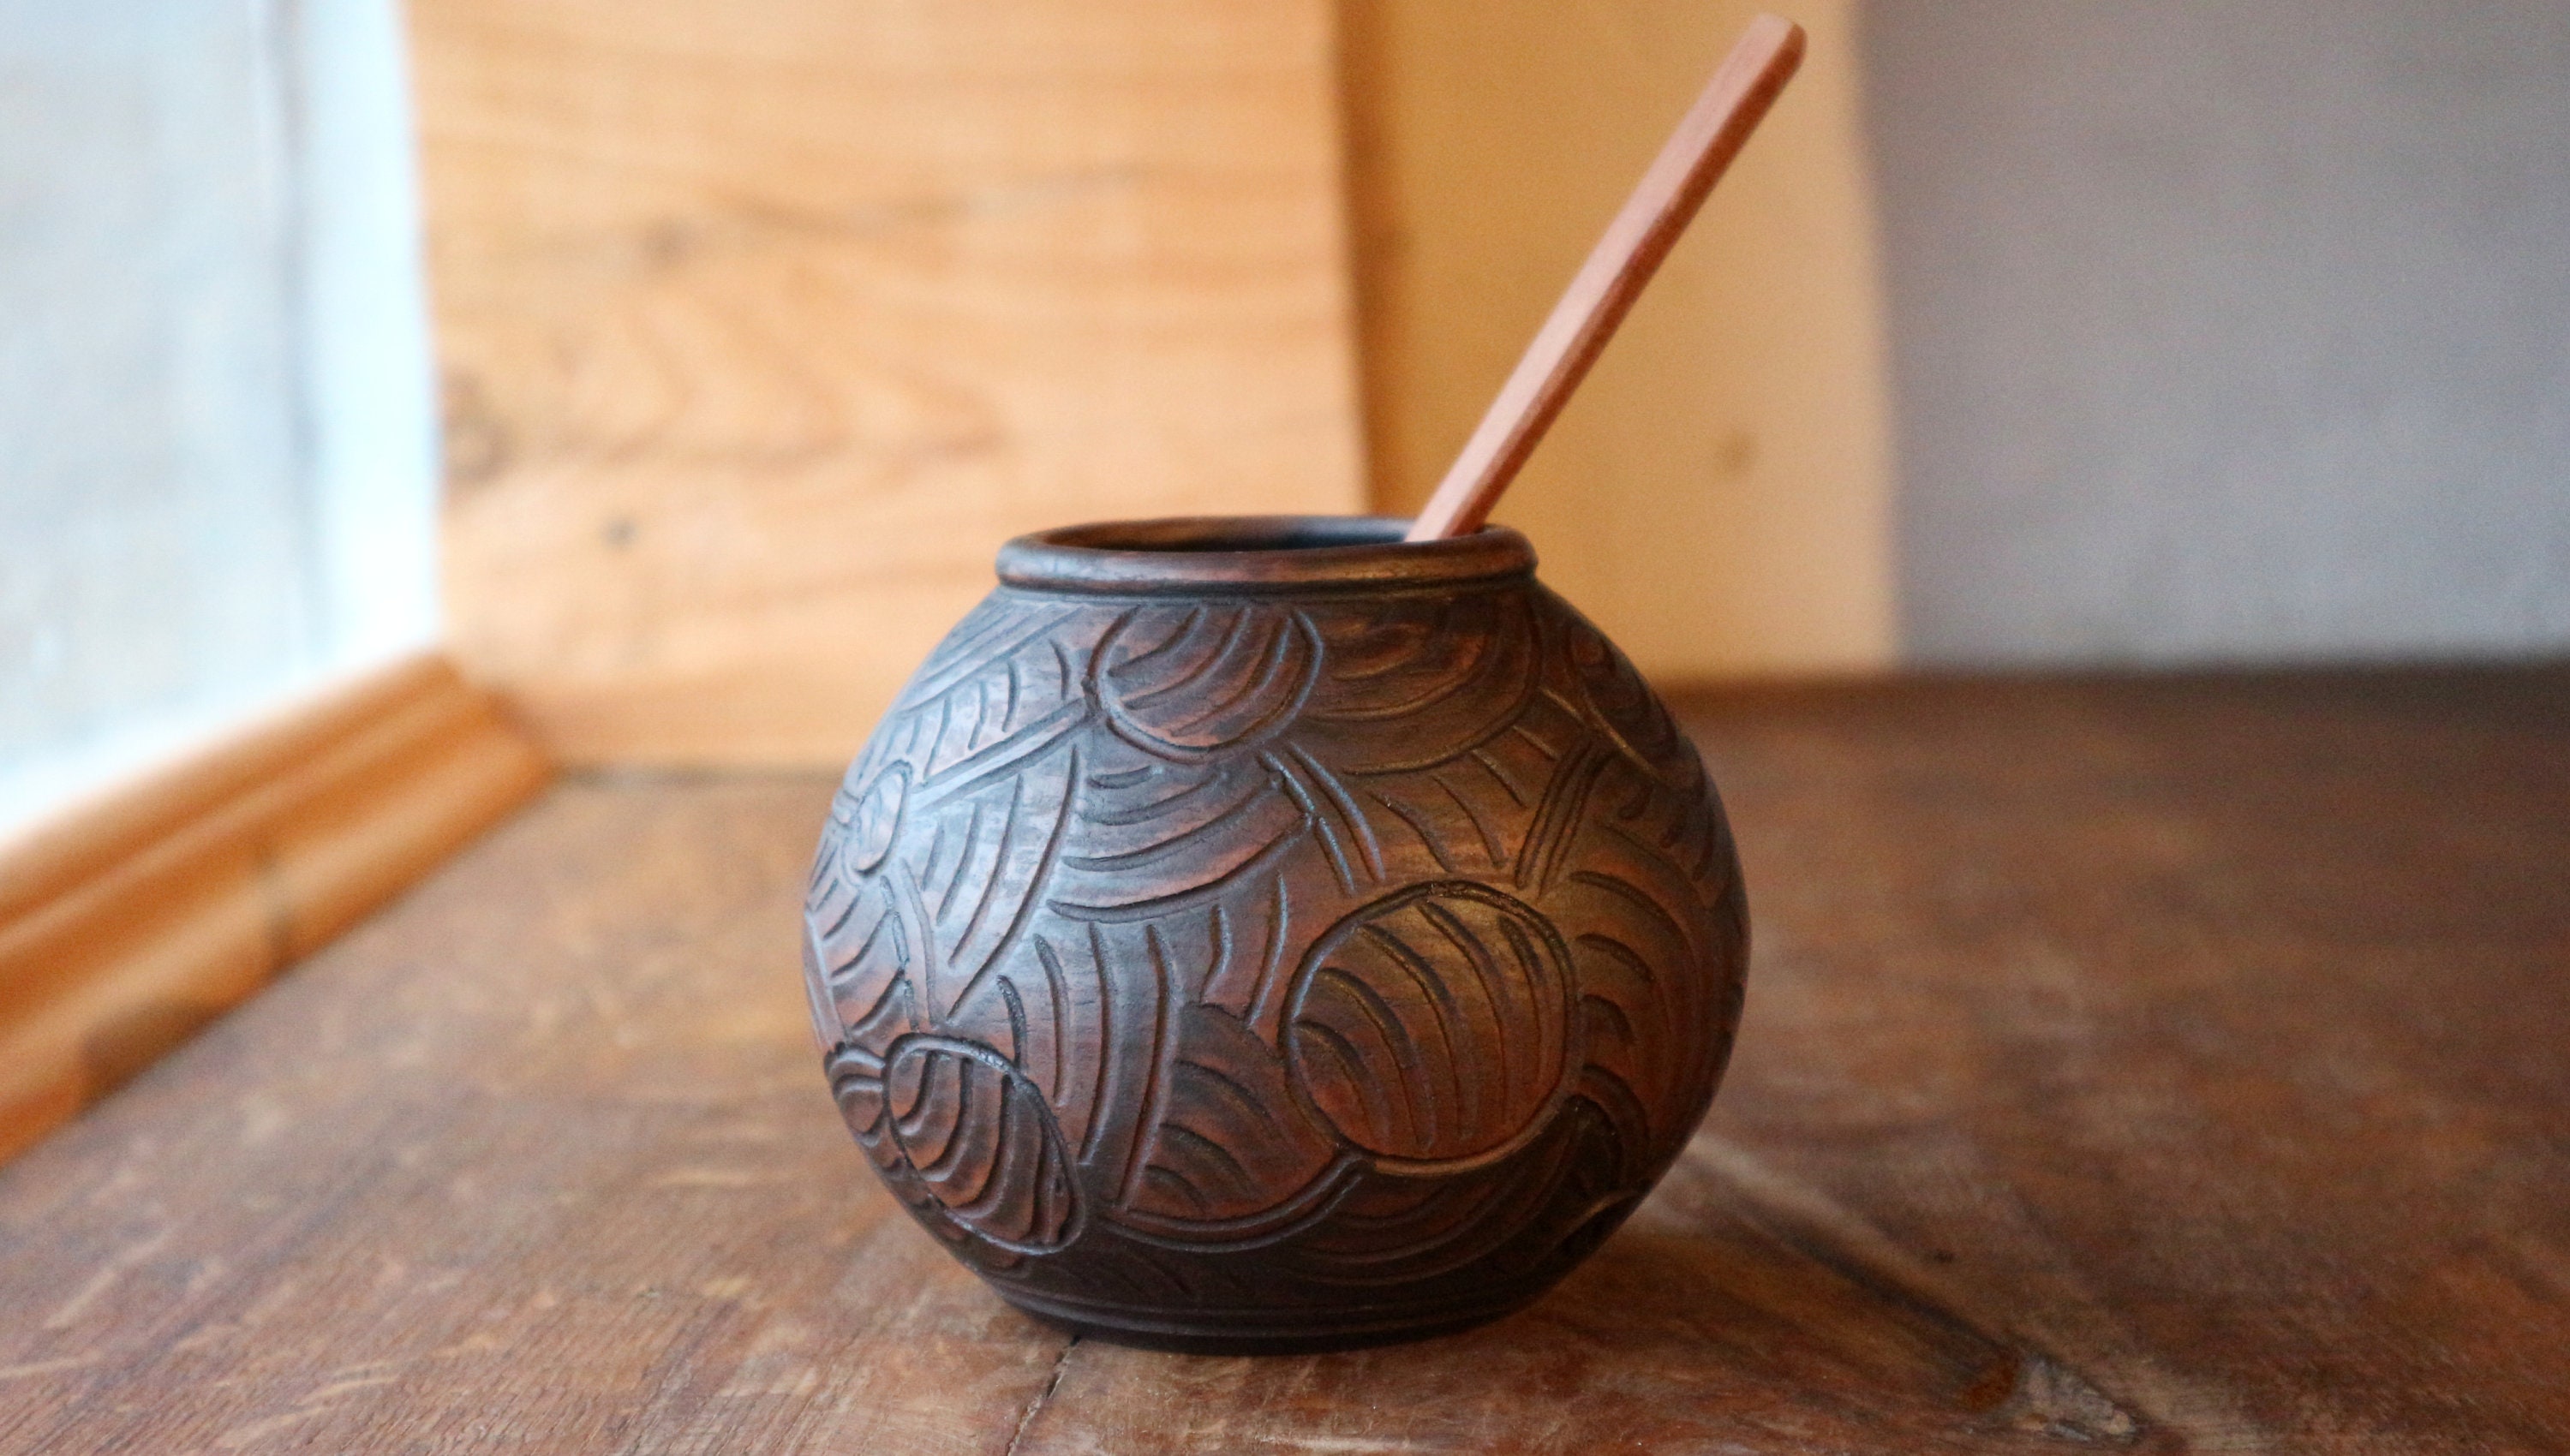 BALIBETOV Premium Yerba Mate Gourd (Mate Cup) - Uruguayan Mate - Leather  Wrapped - Includes Stainless Steel Bombilla and Cleaning Brush. (Camionero